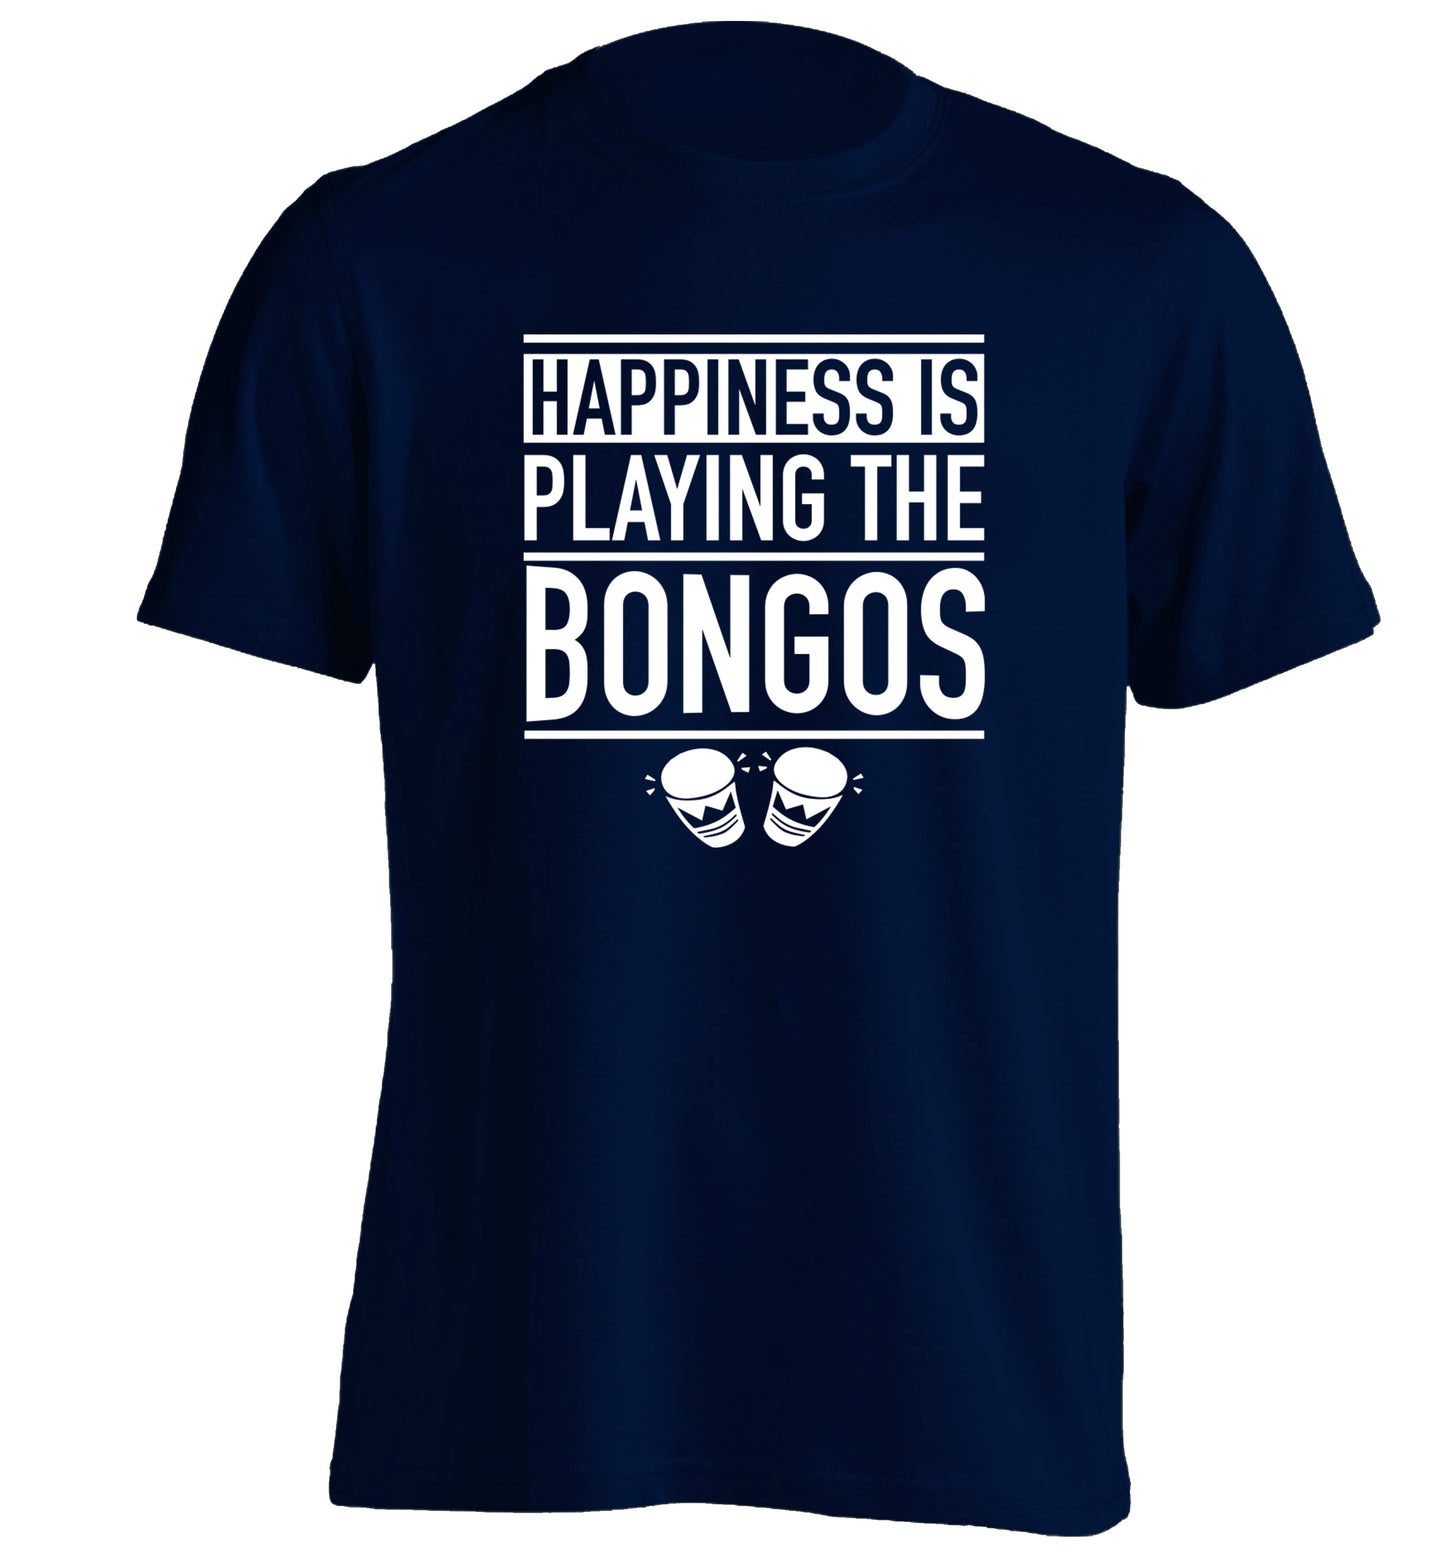 Happiness is playing the bongos adults unisex navy Tshirt 2XL